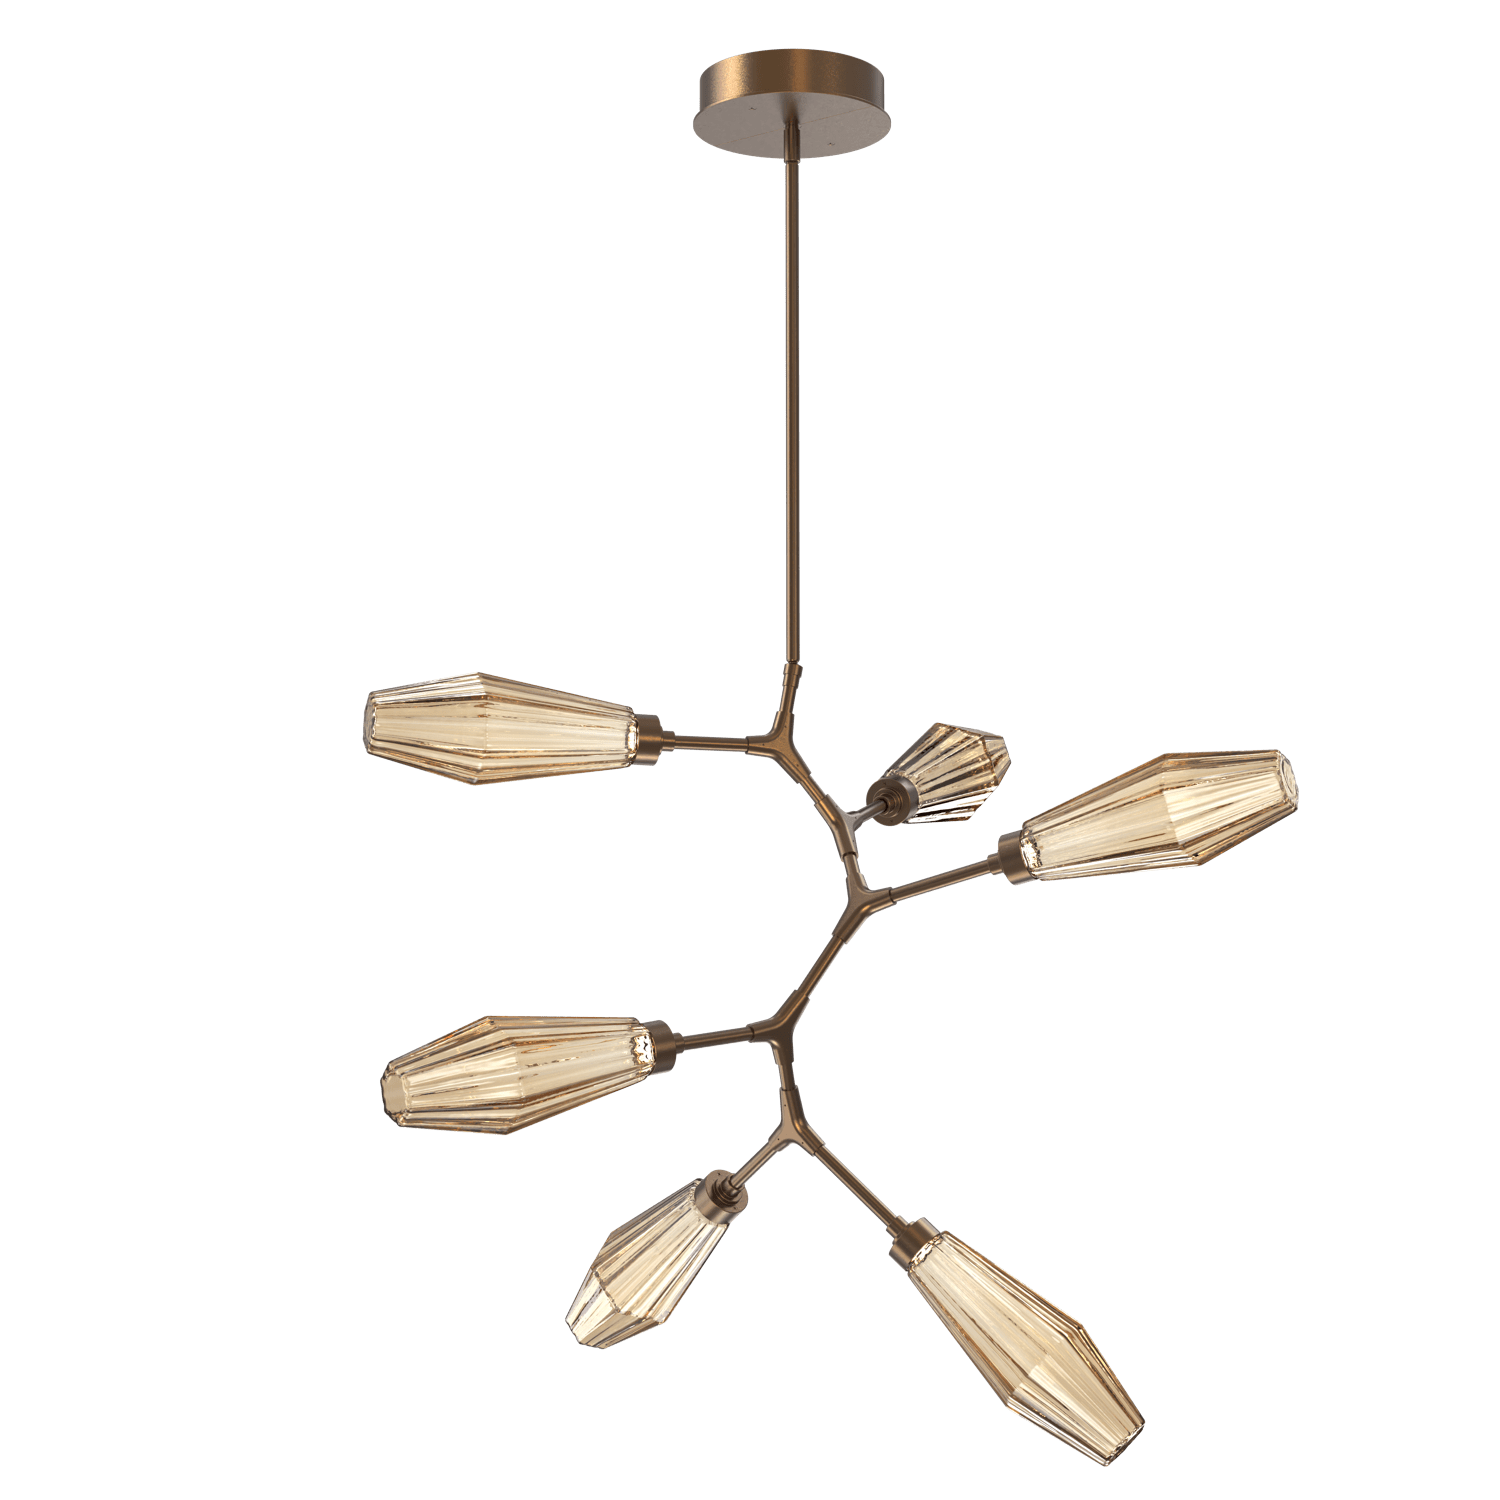 CHB0049-VA-FB-RB-Hammerton-Studio-Aalto-6-light-modern-vine-chandelier-with-flat-bronze-finish-and-optic-ribbed-bronze-glass-shades-and-LED-lamping